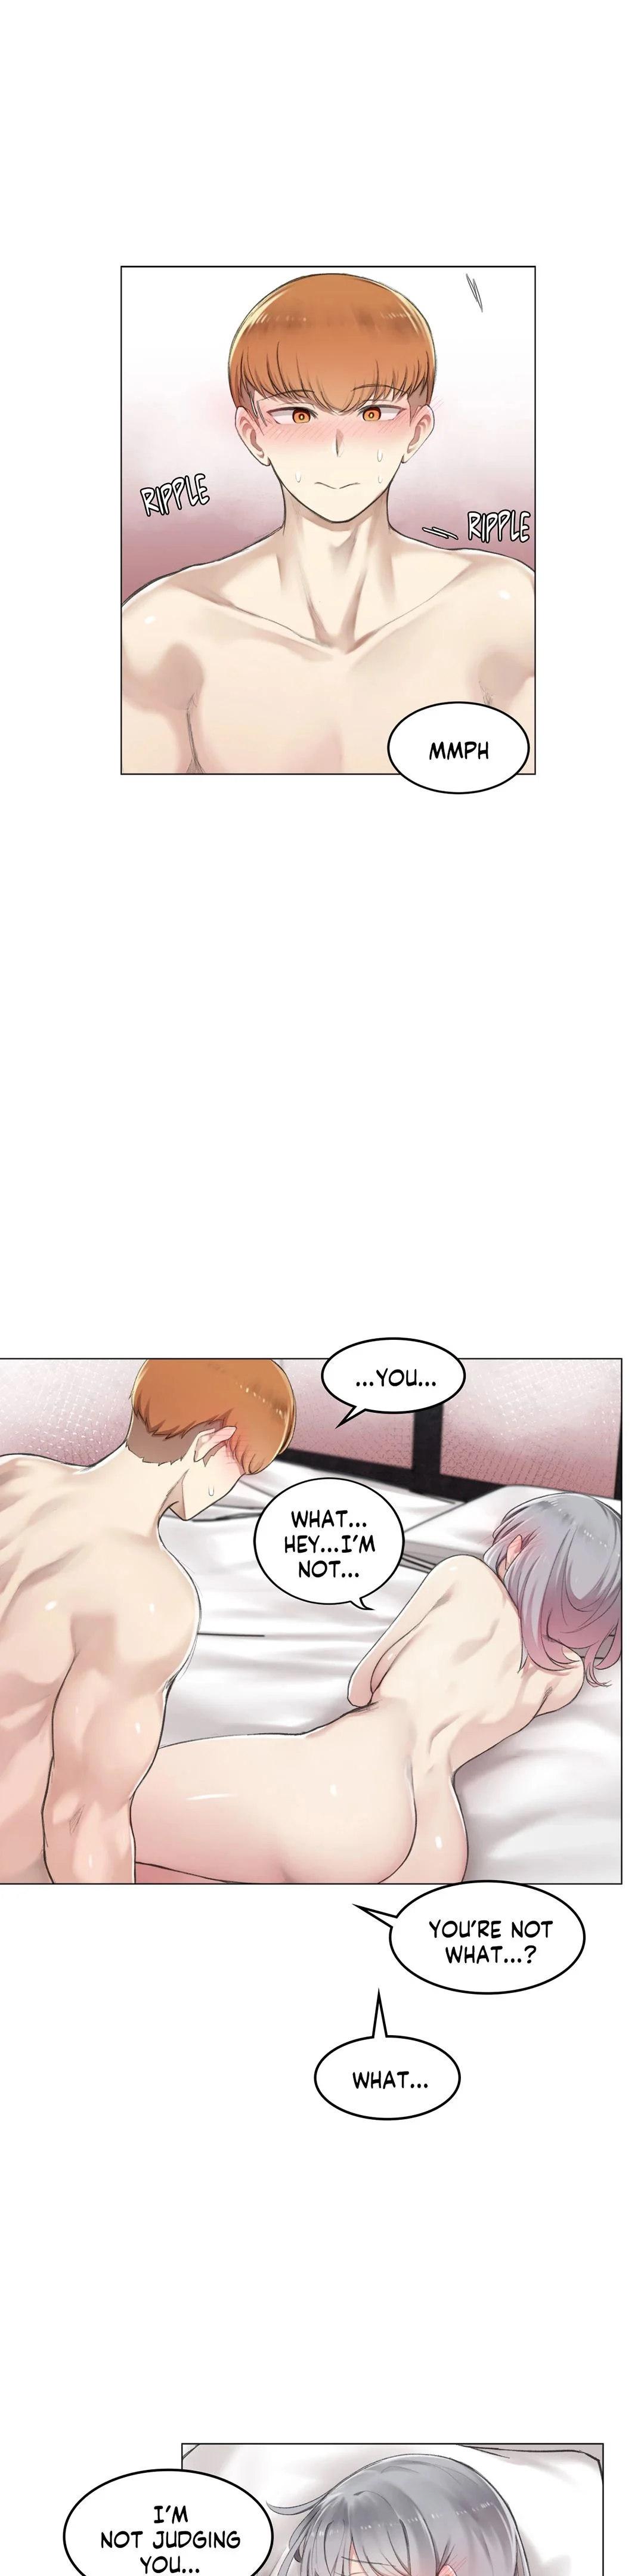 [Dumangoon, KONG_] Sexcape Room: Snap Off Ch.7/7 [English] [Manhwa PDF] Completed 205